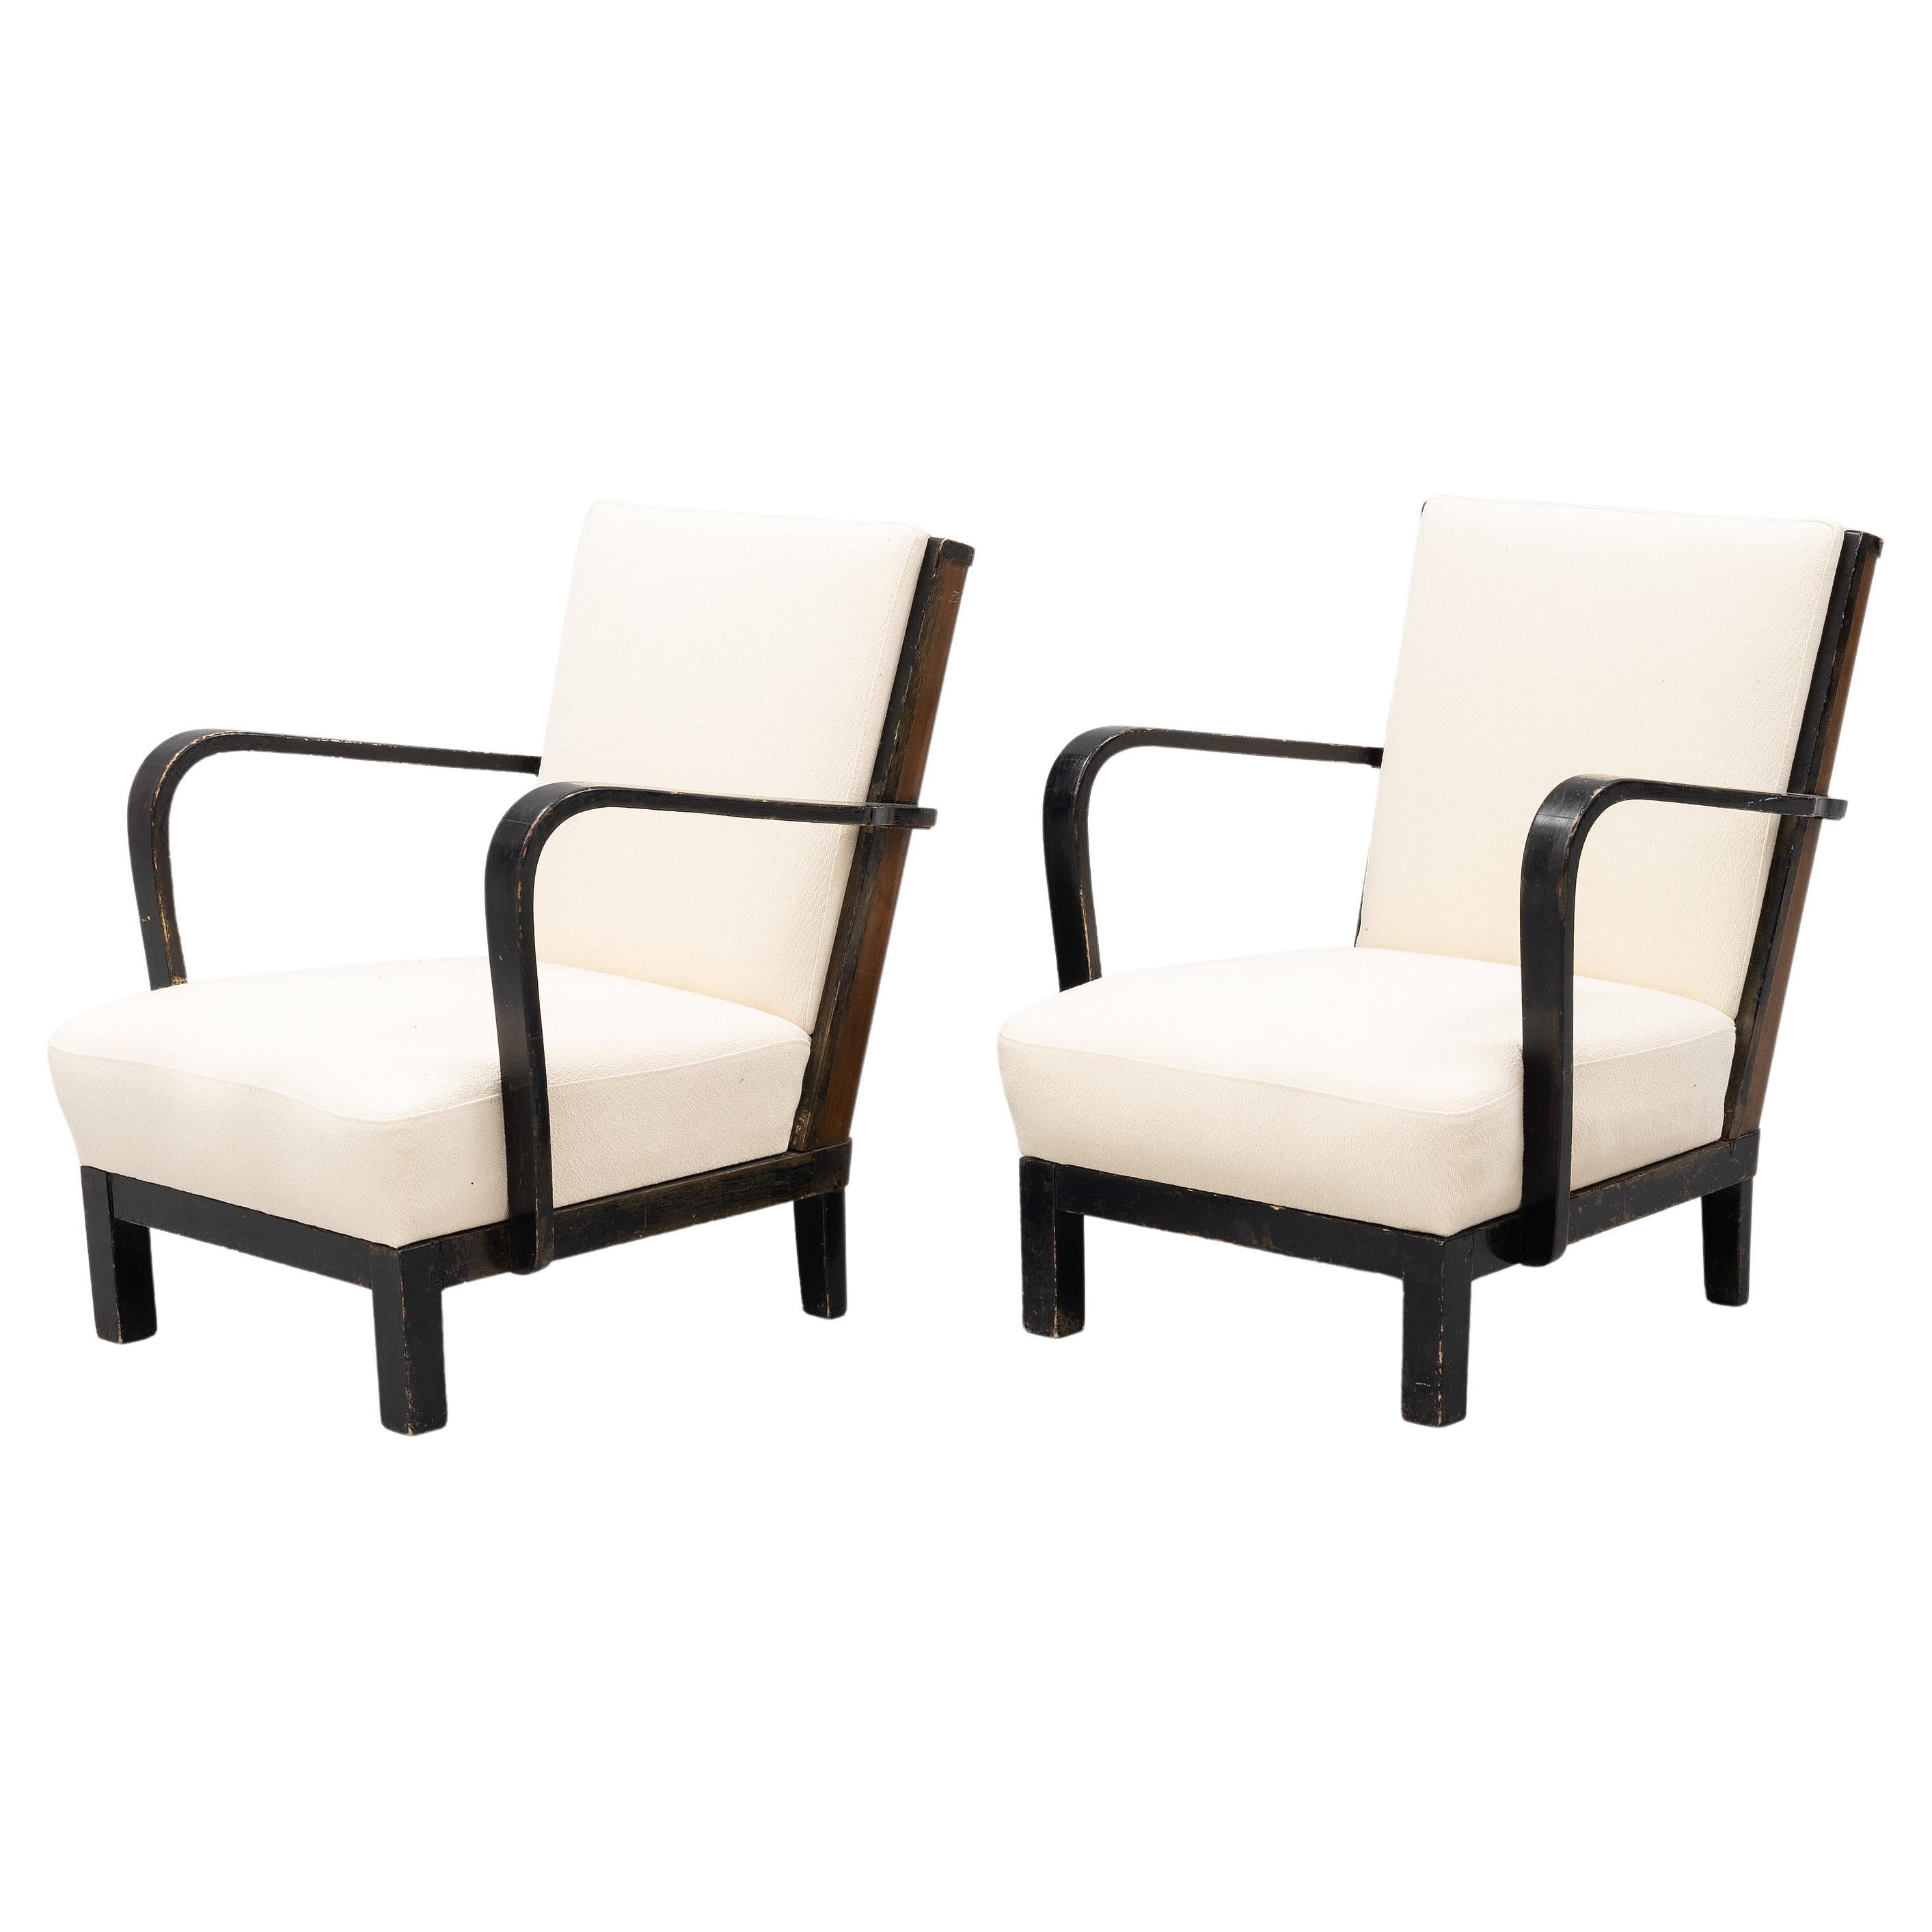 Art Deco Finnish Lounge Chairs, Ivory Boucle, Made by Asko, Finland 1935